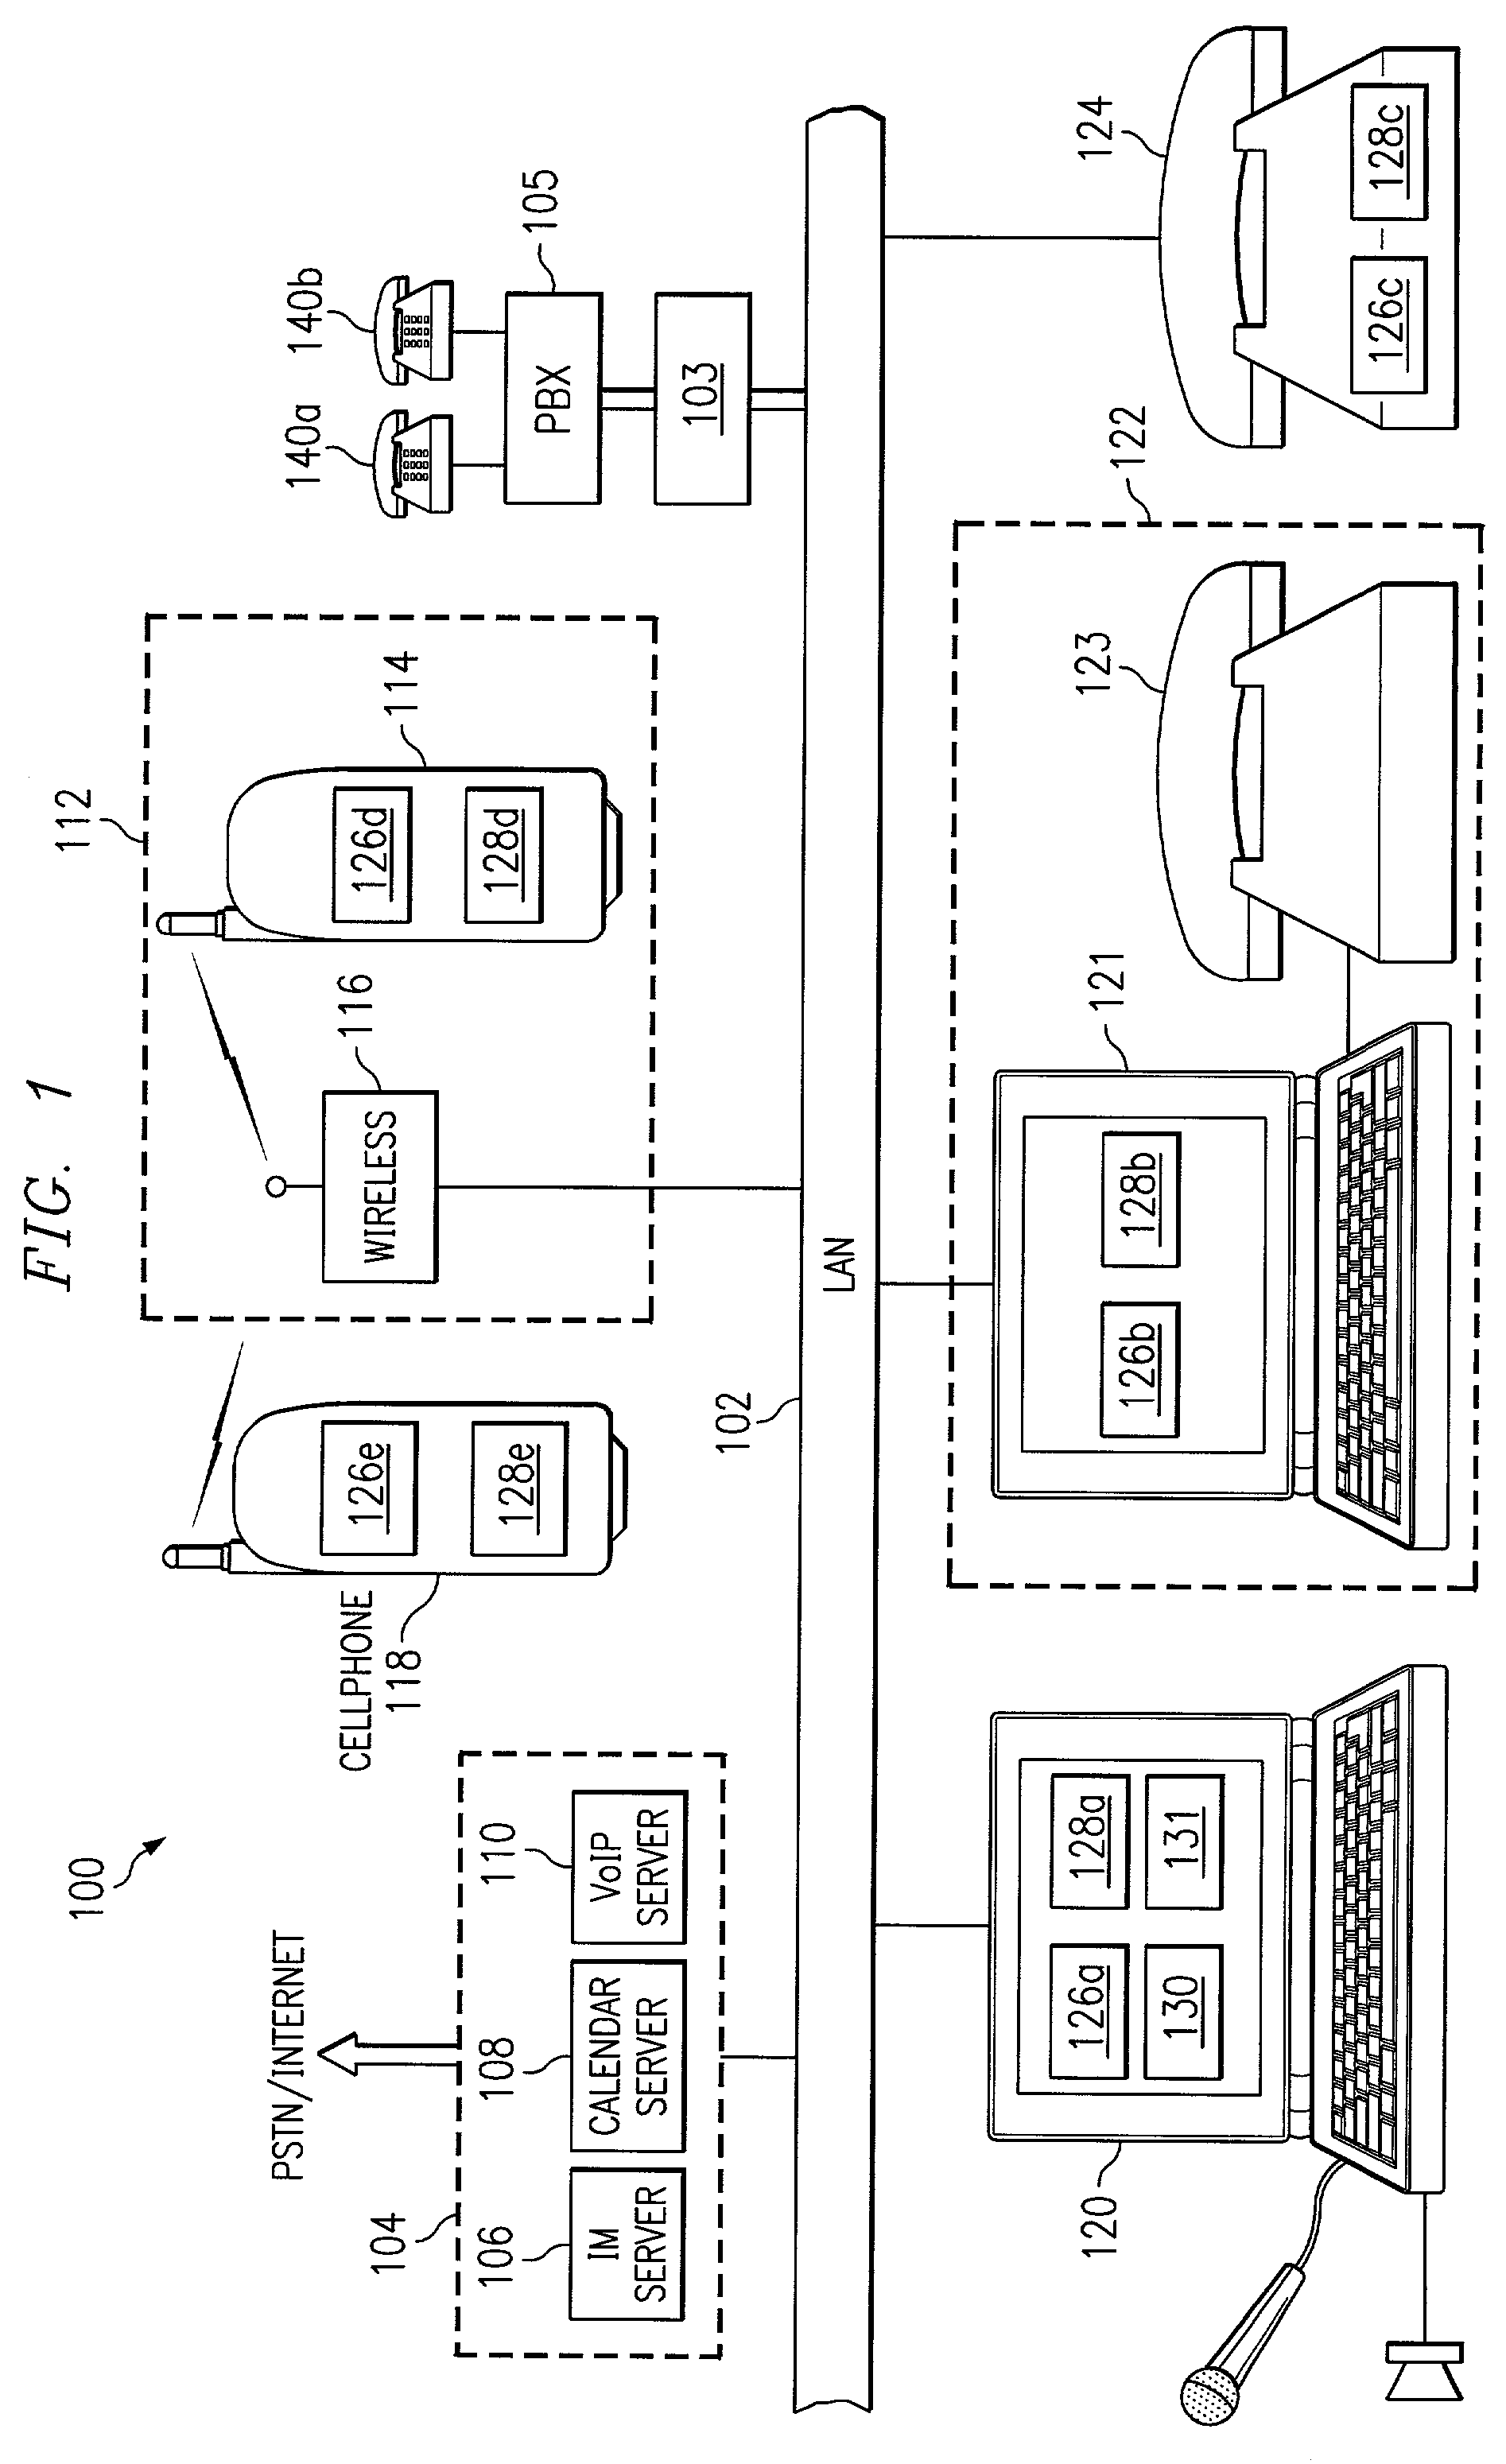 System and method for collaborating using instant messaging in multimedia telephony-over-LAN conferences